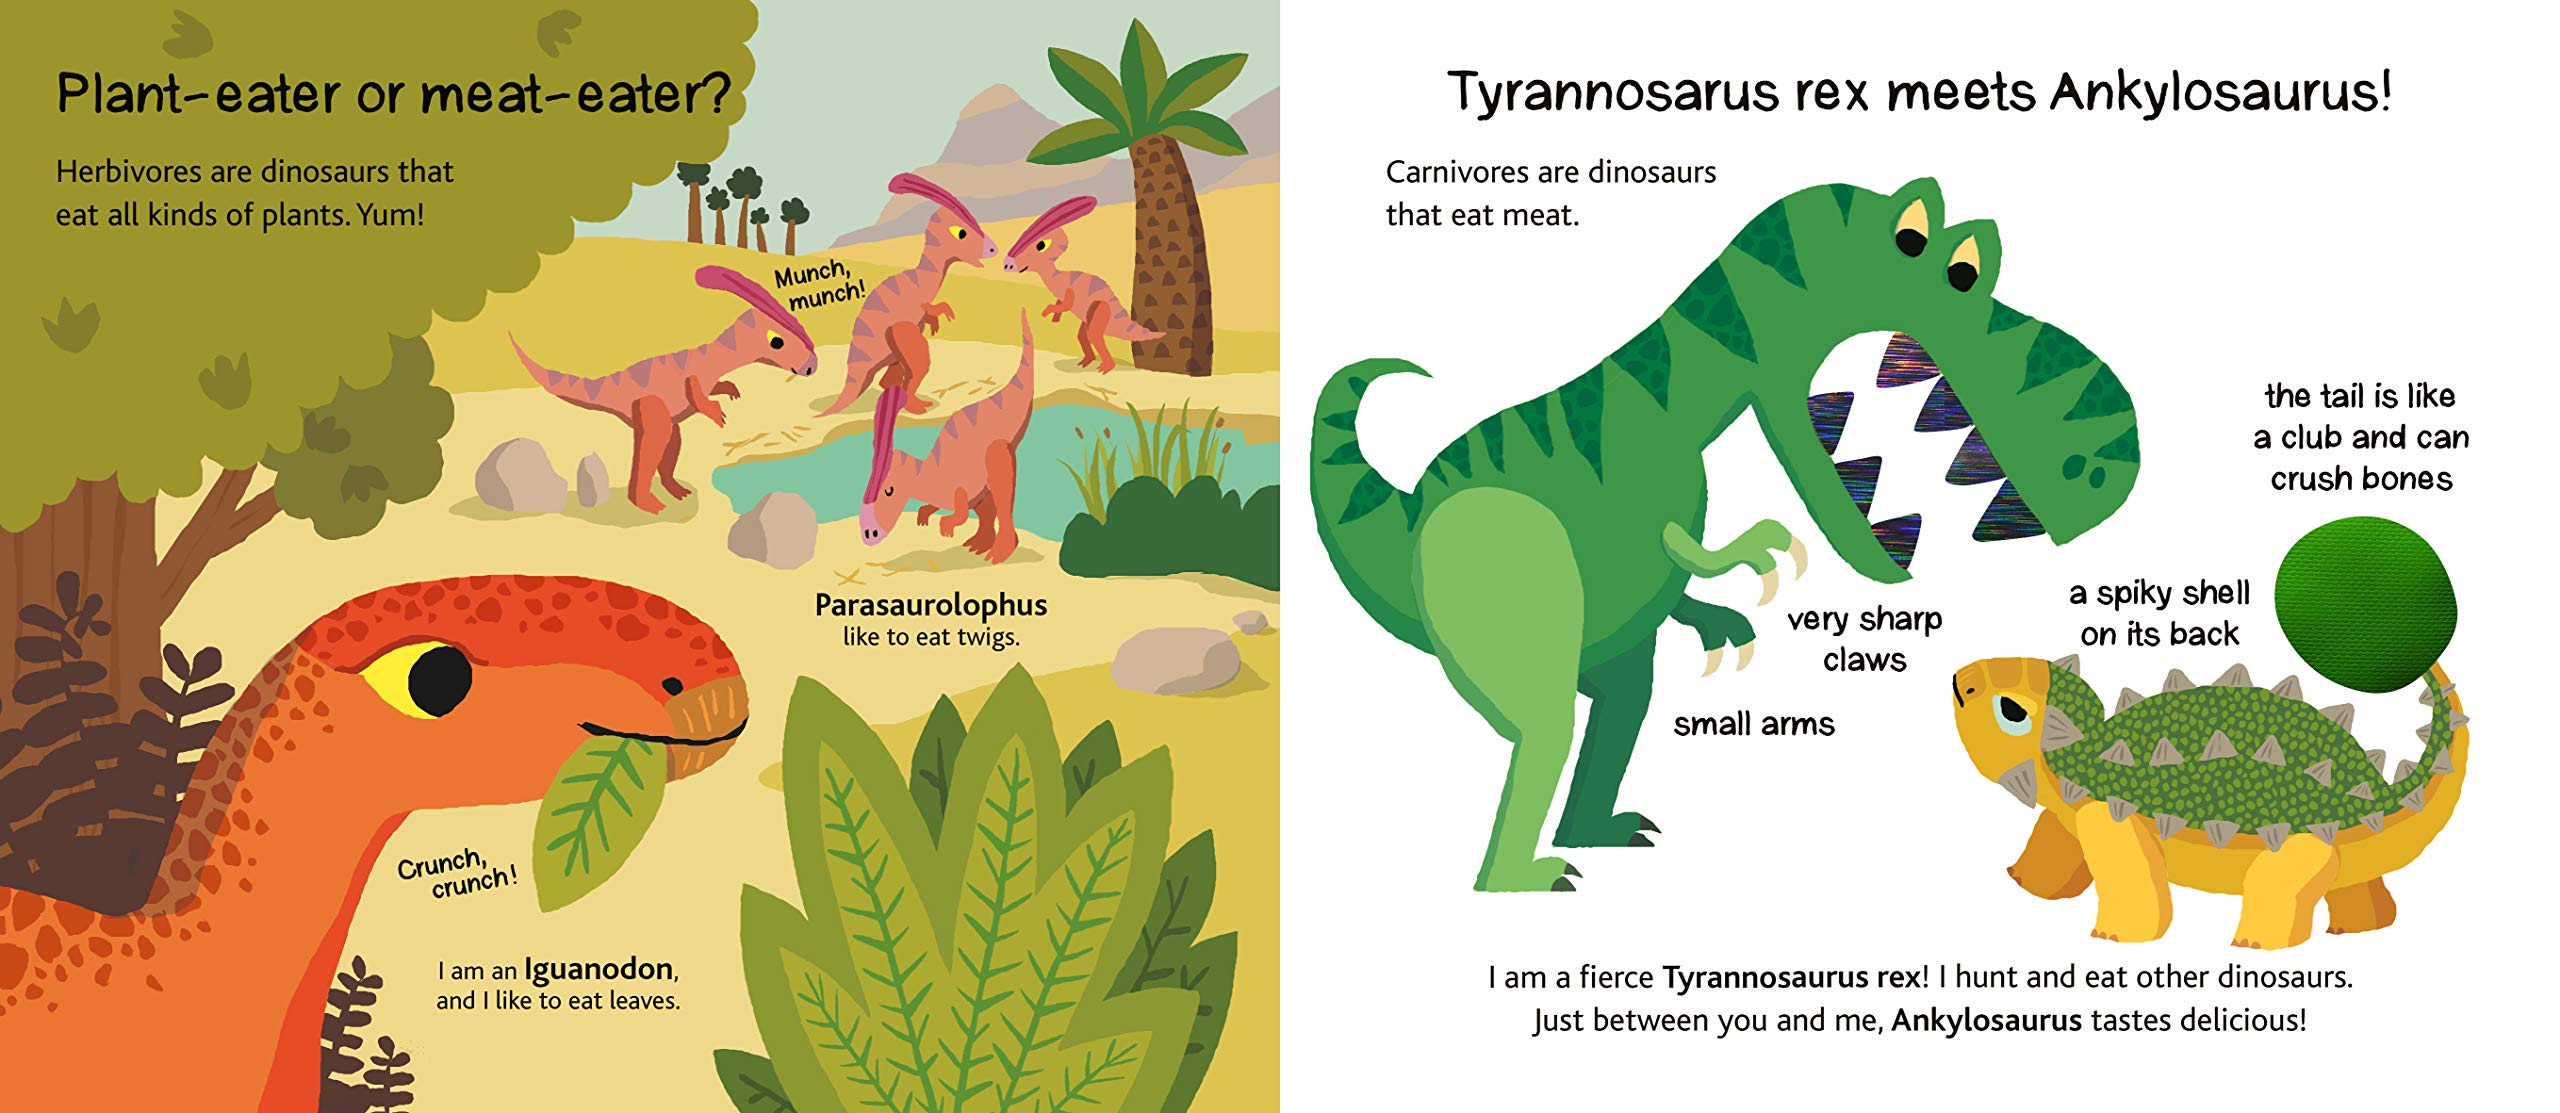 Touch and Explore: Dinosaurs